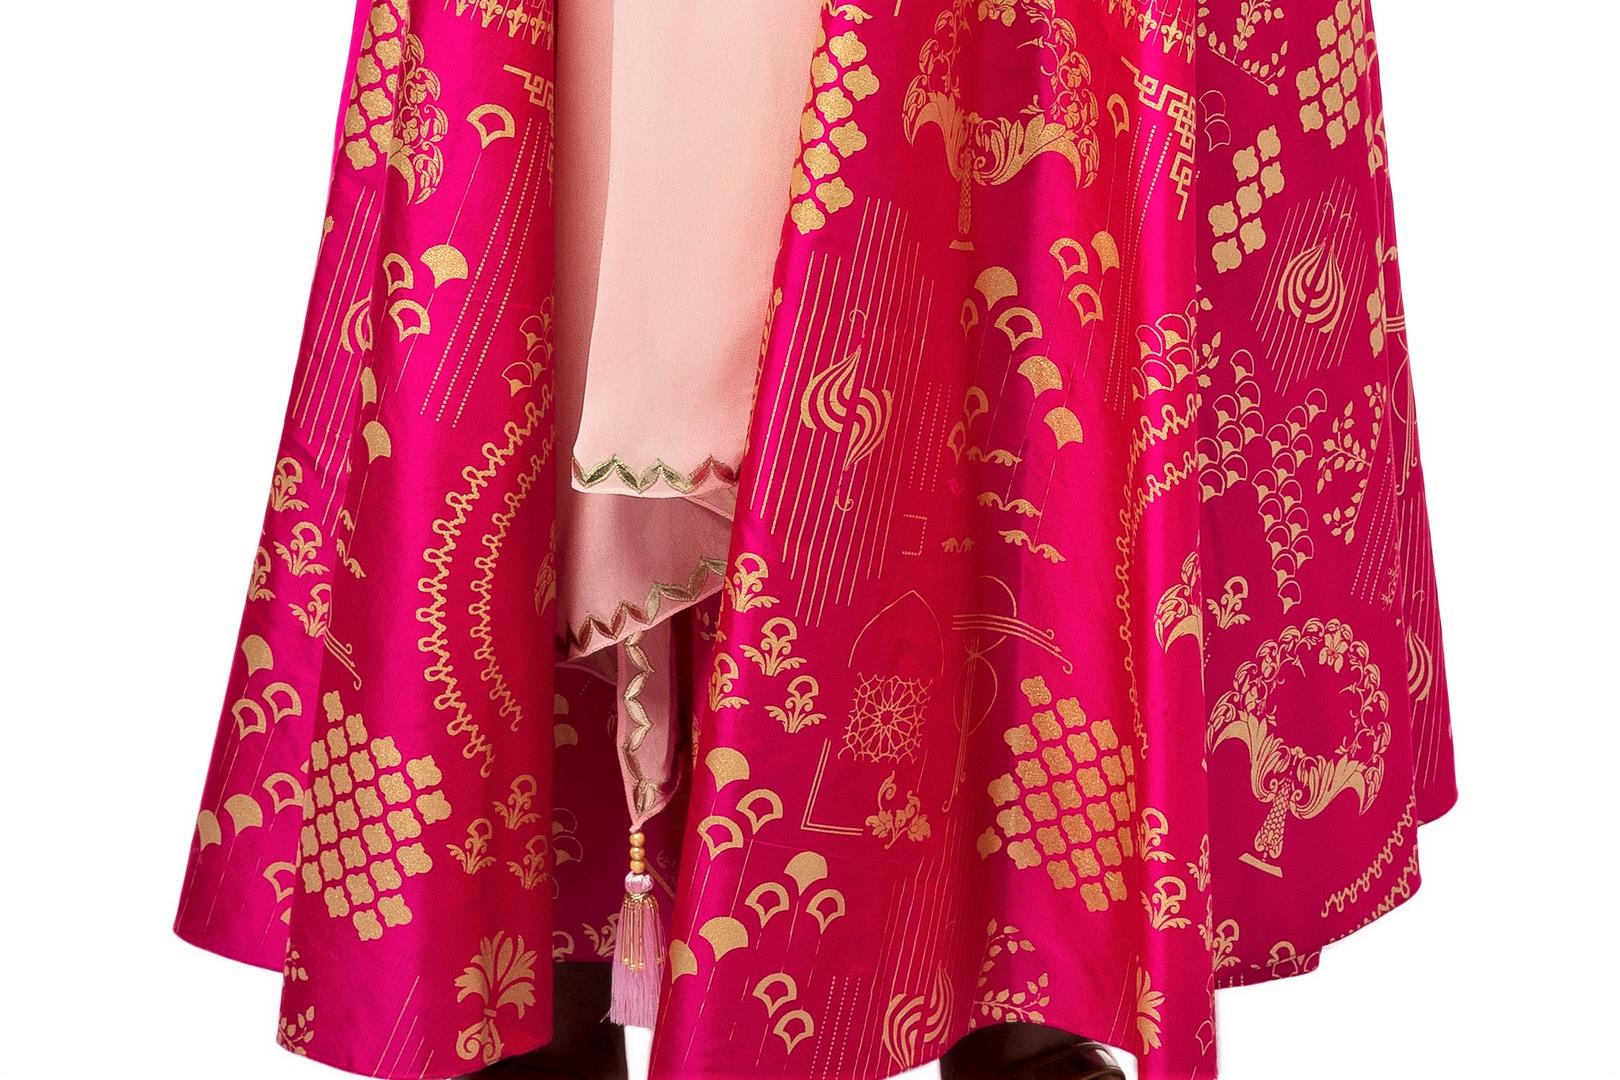 Buy dusty pink and hot pink embroidered Anarkali with draped dupatta online in USA. Revamp your wardrobe with an exquisite variety of designer dresses, designer gowns, wedding lehengas, Anarkali suits, Indian sarees from Pure Elegance Indian clothing store in USA or from our online store. -ghera